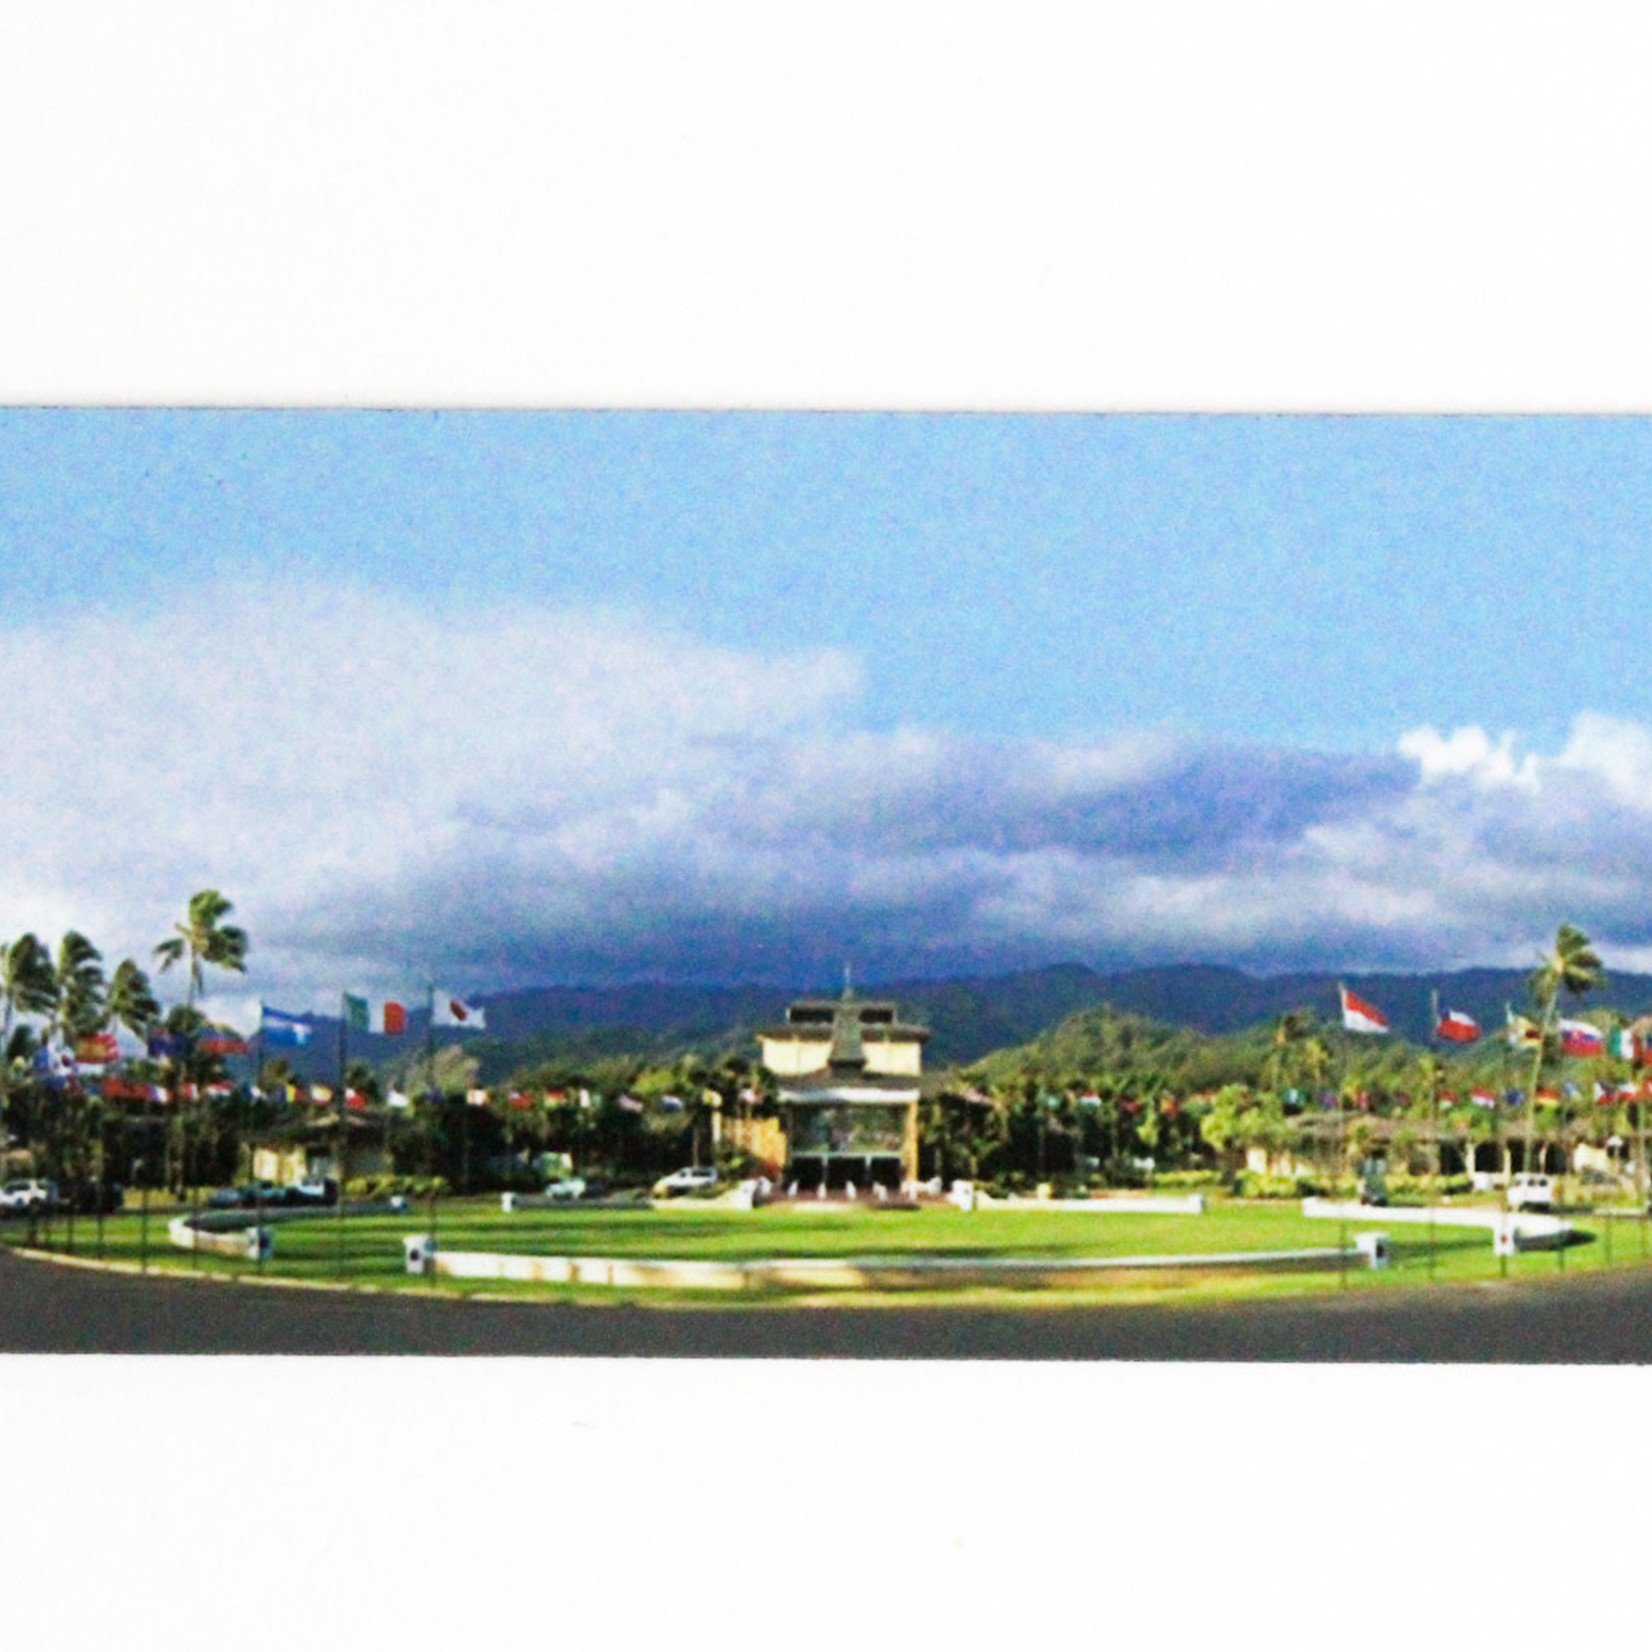 BYUH MAGNET (Campus image) 2X6